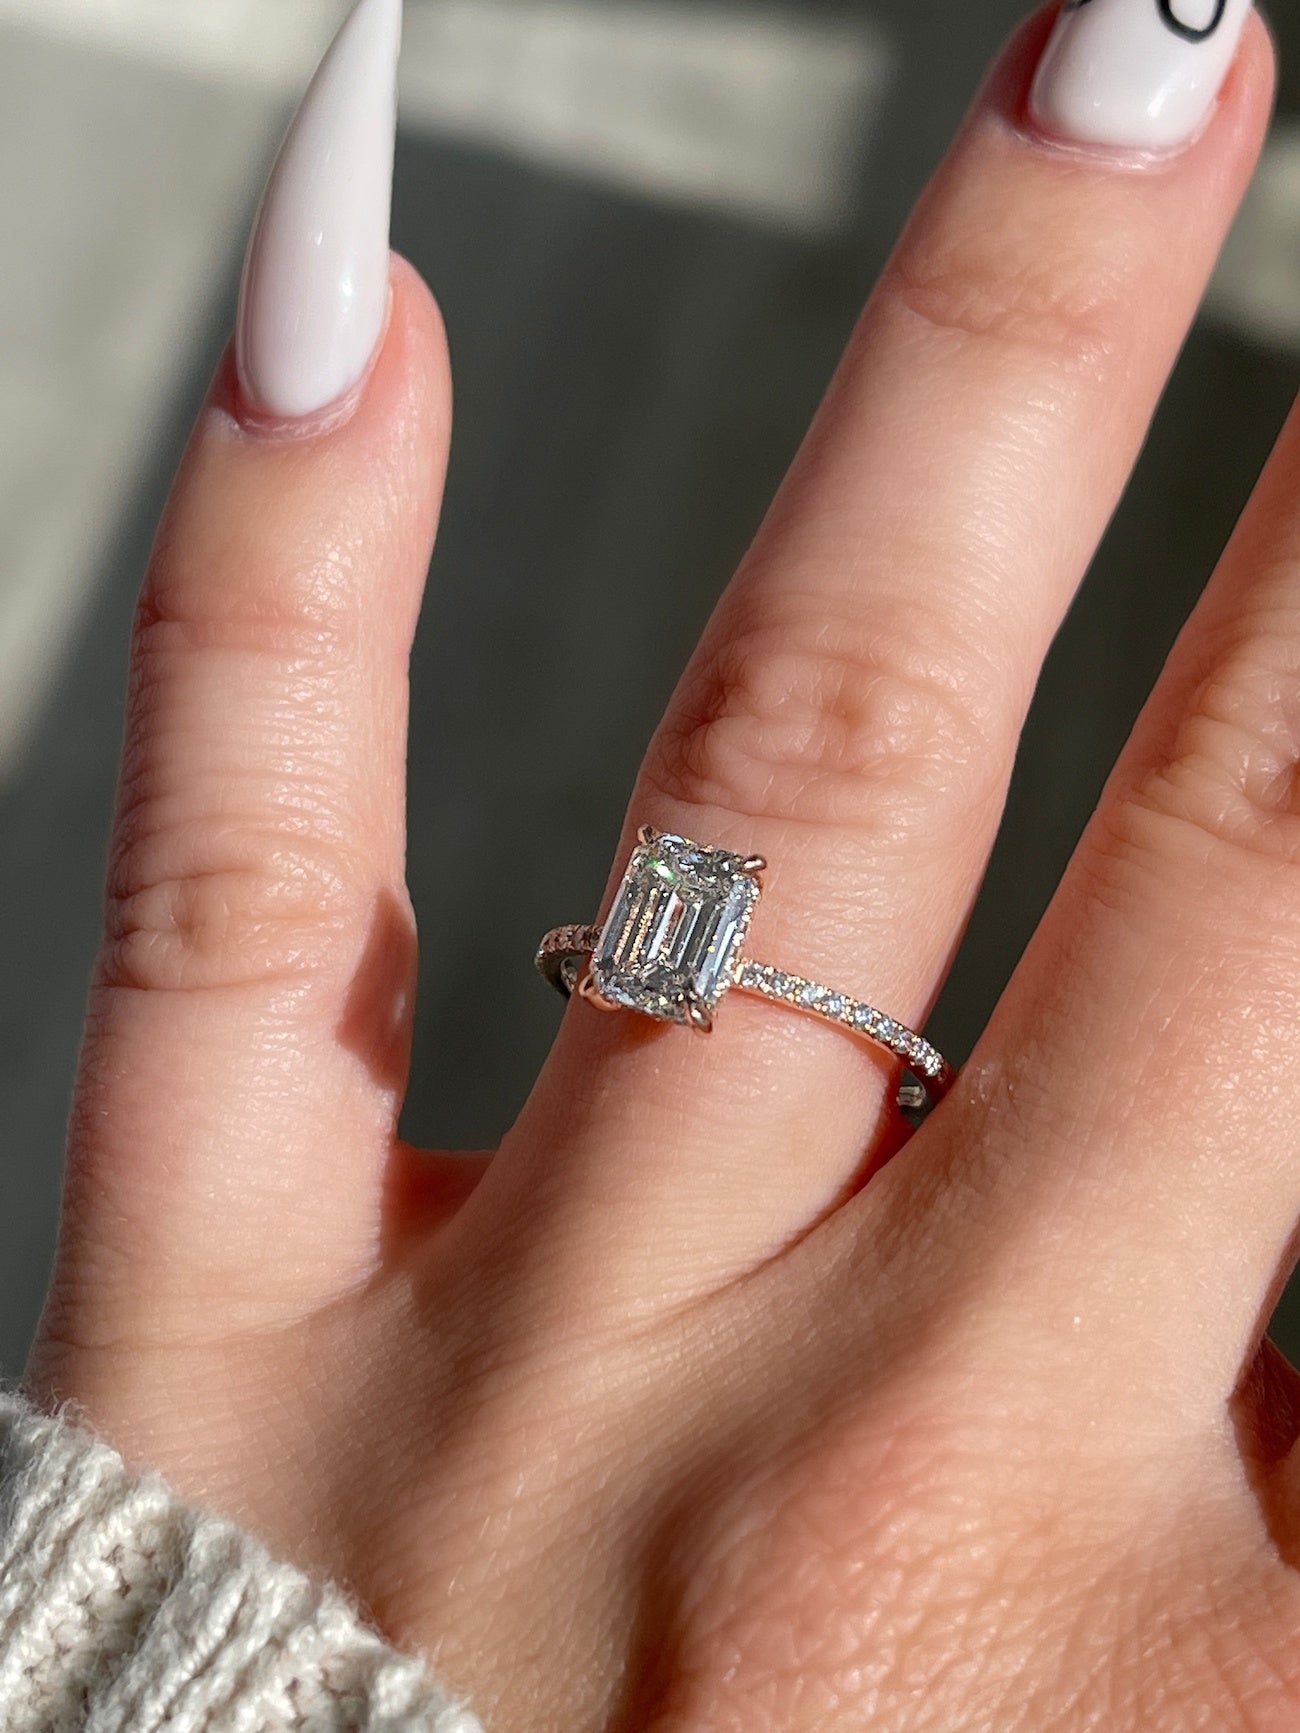 Load image into Gallery viewer, Engagement Ring Wednesday | 1.50 Emerald Cut Diamond | Rose Gold Hidden Halo Setting - Happy Jewelers Fine Jewelry Lifetime Warranty
